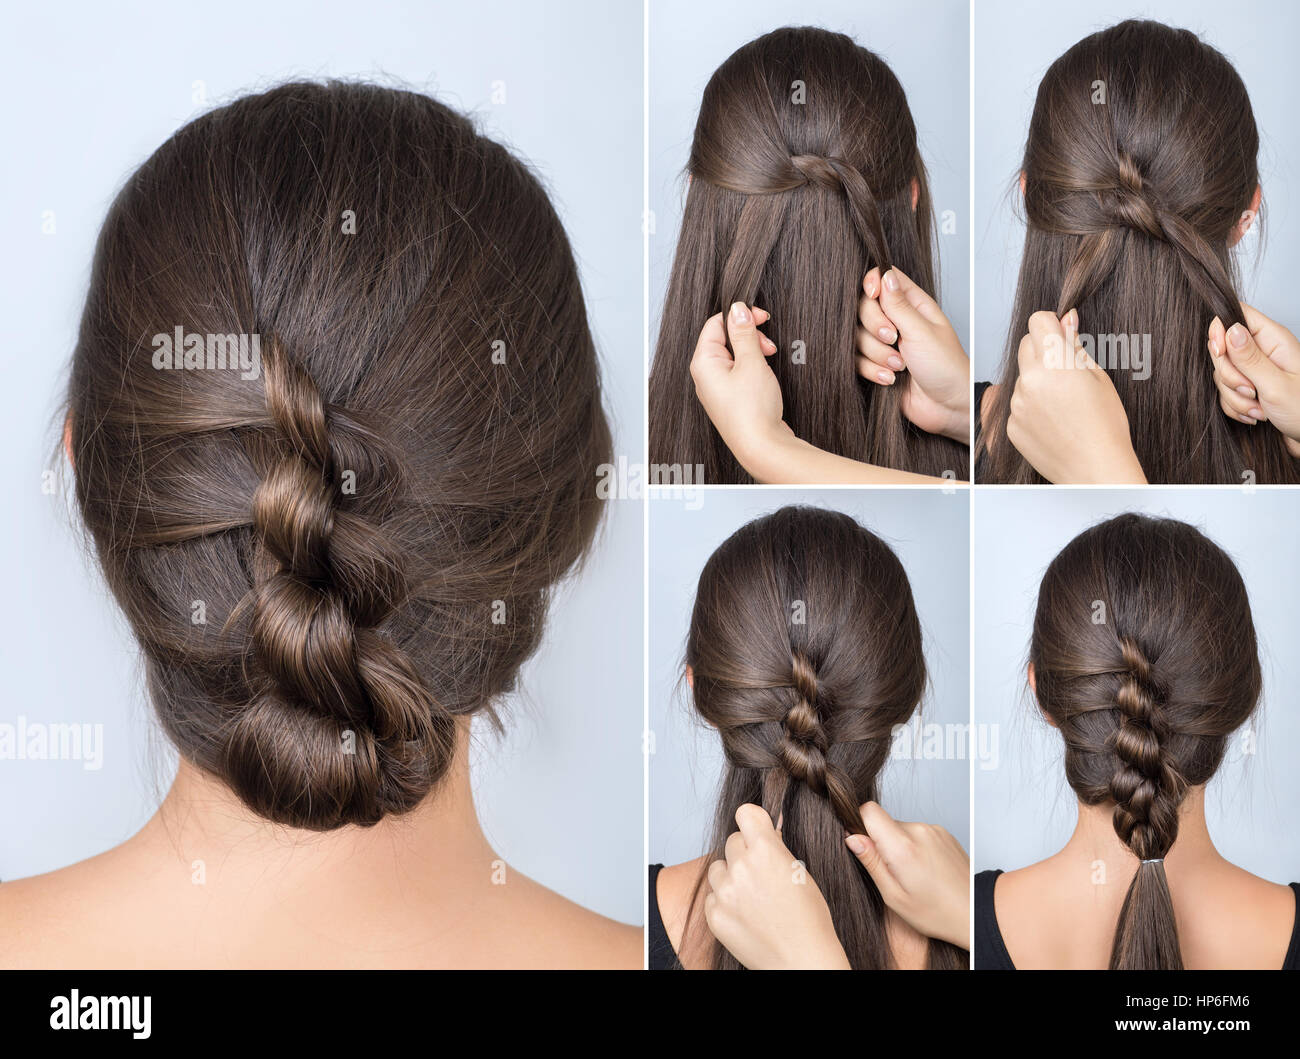 10 New Easy Hairstyles That You Can Get Within Minutes